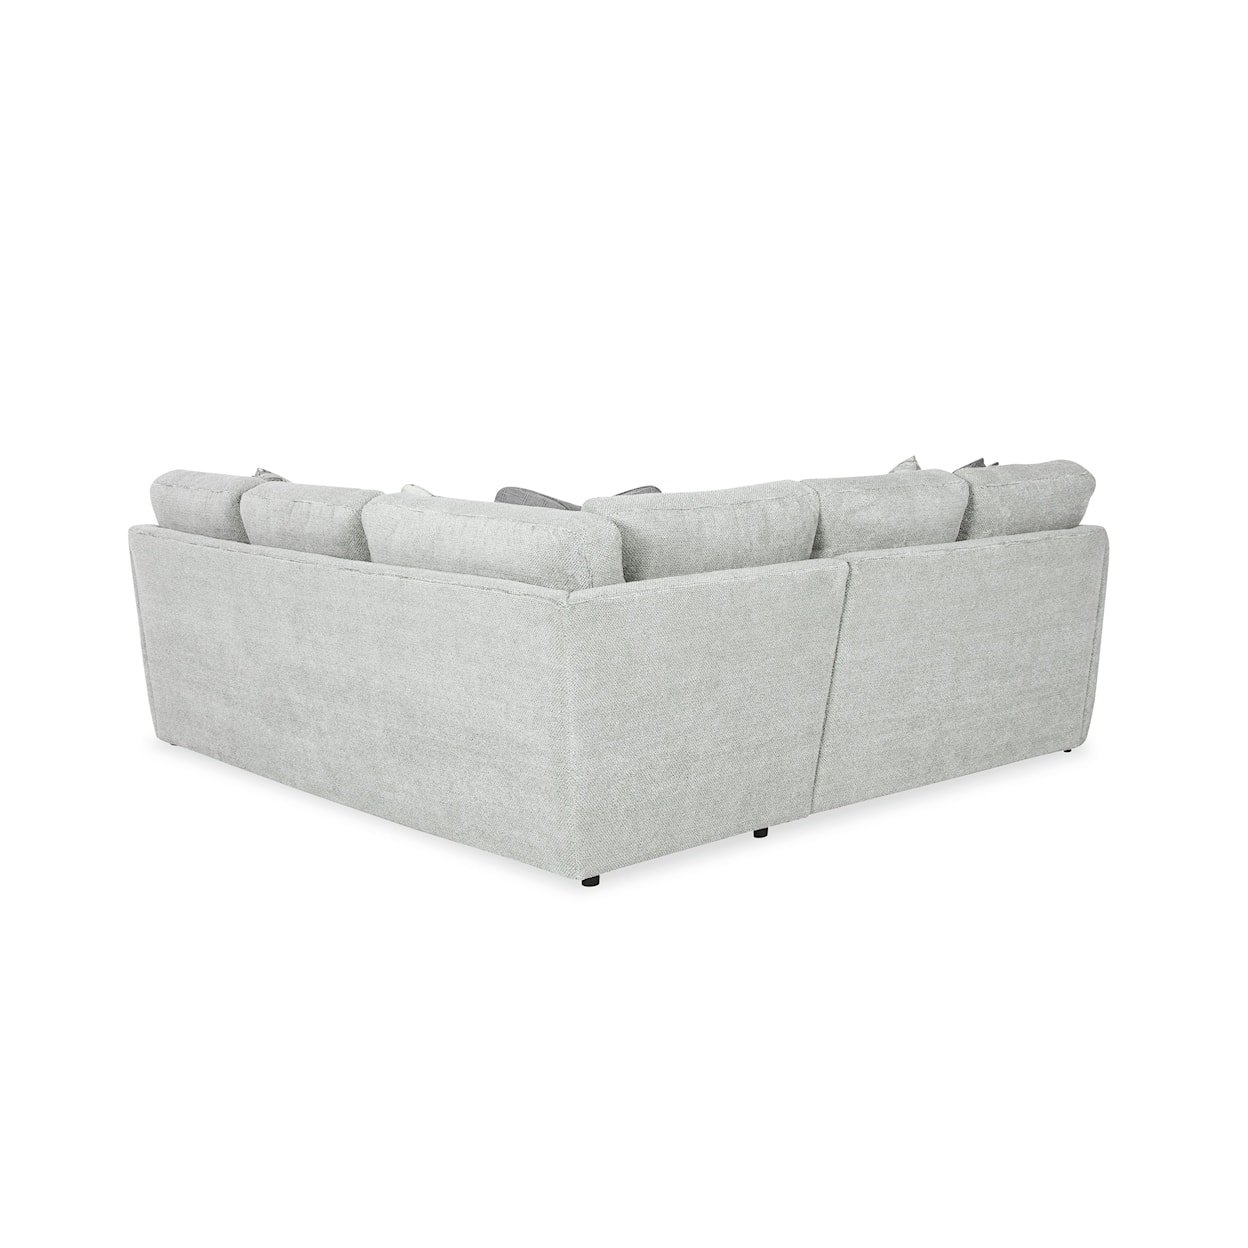 Hickory Craft 716850BD 4-Seat Sectional Sofa w/ LAF Loveseat